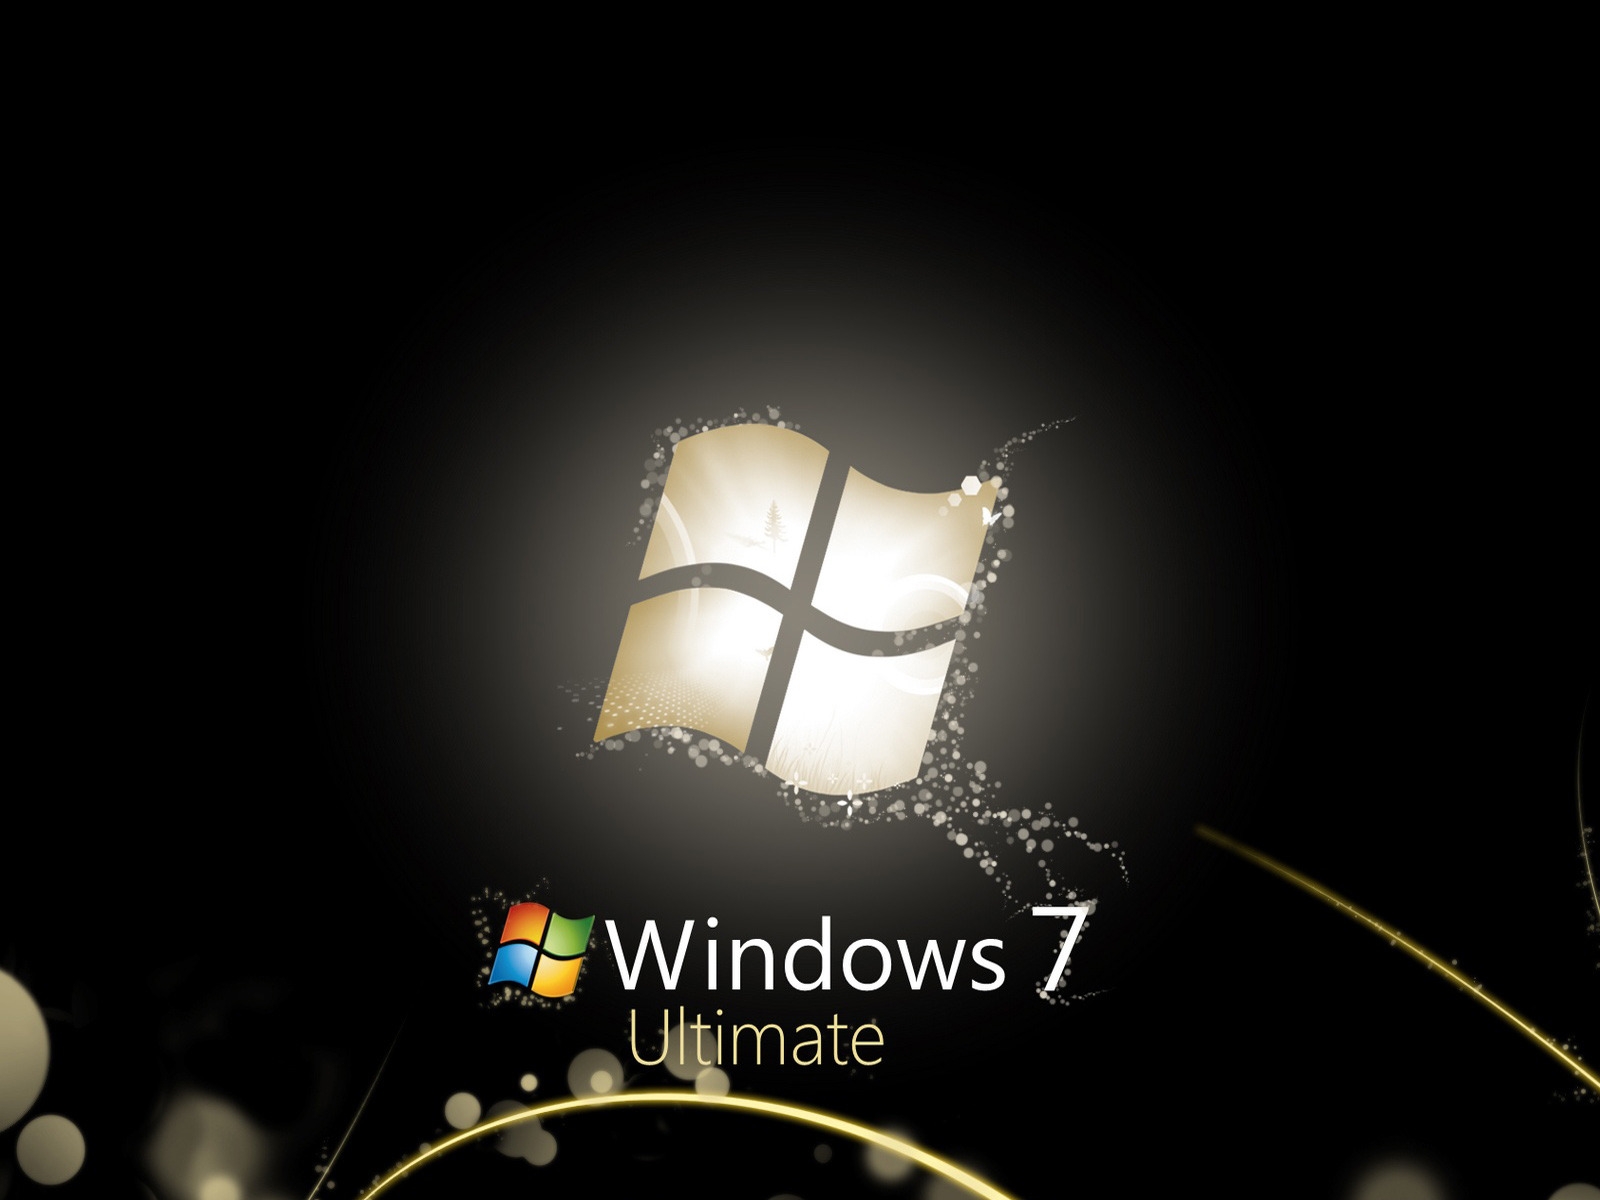 Black Windows 7 Ultimate for 1600 x 1200 resolution